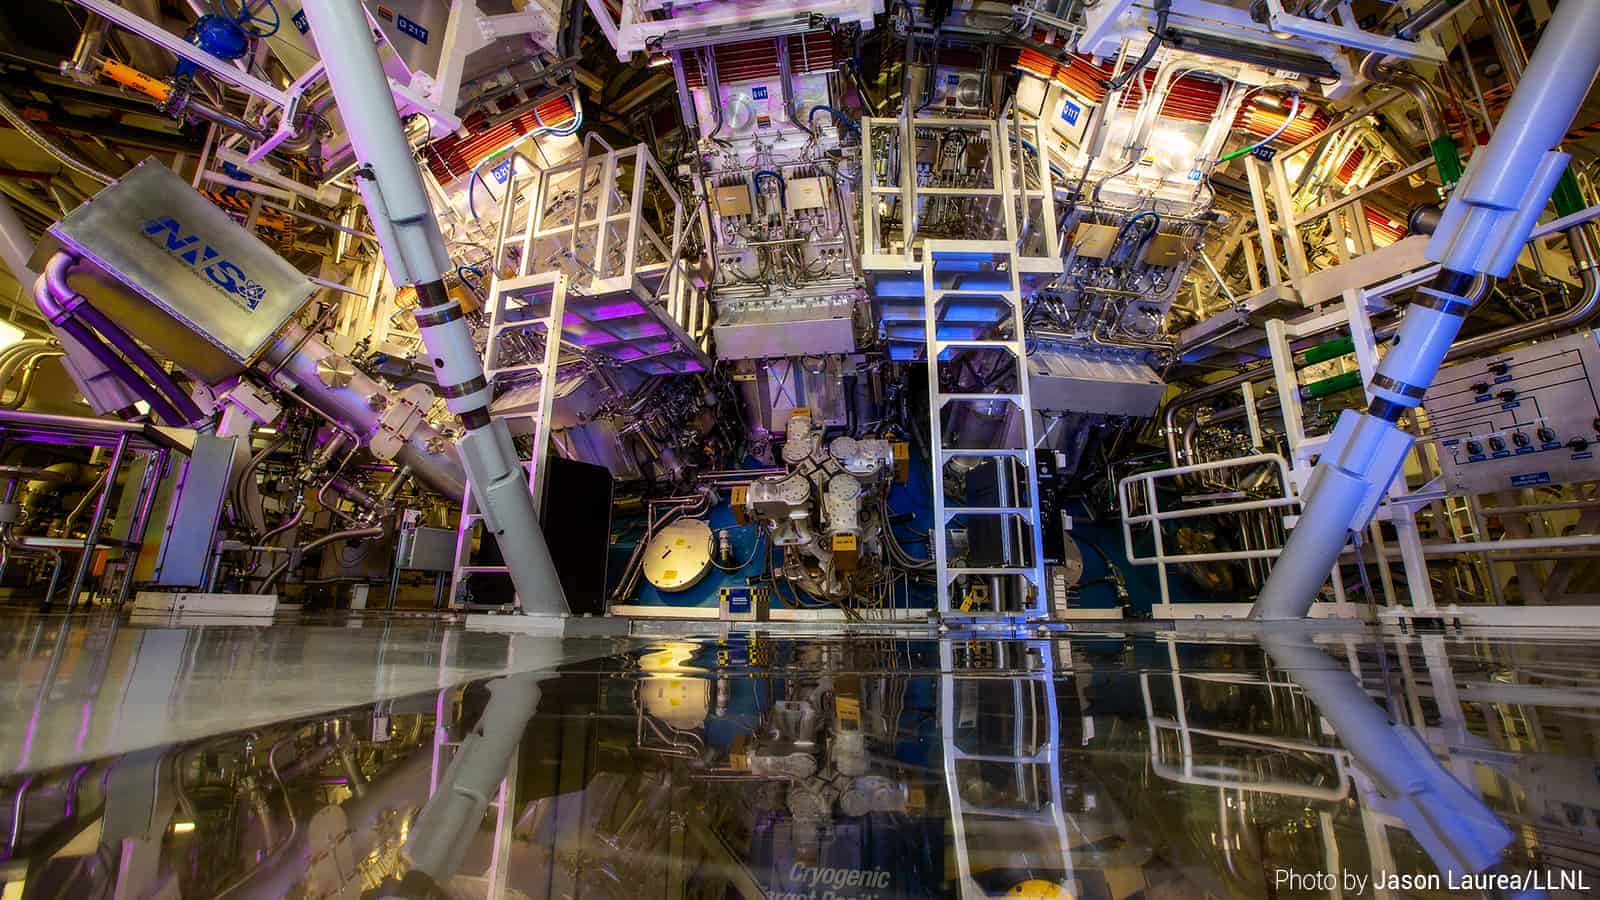 Nuclear Fusion Reactor Produces Record-breaking 10 Quadrillion Watts of Power